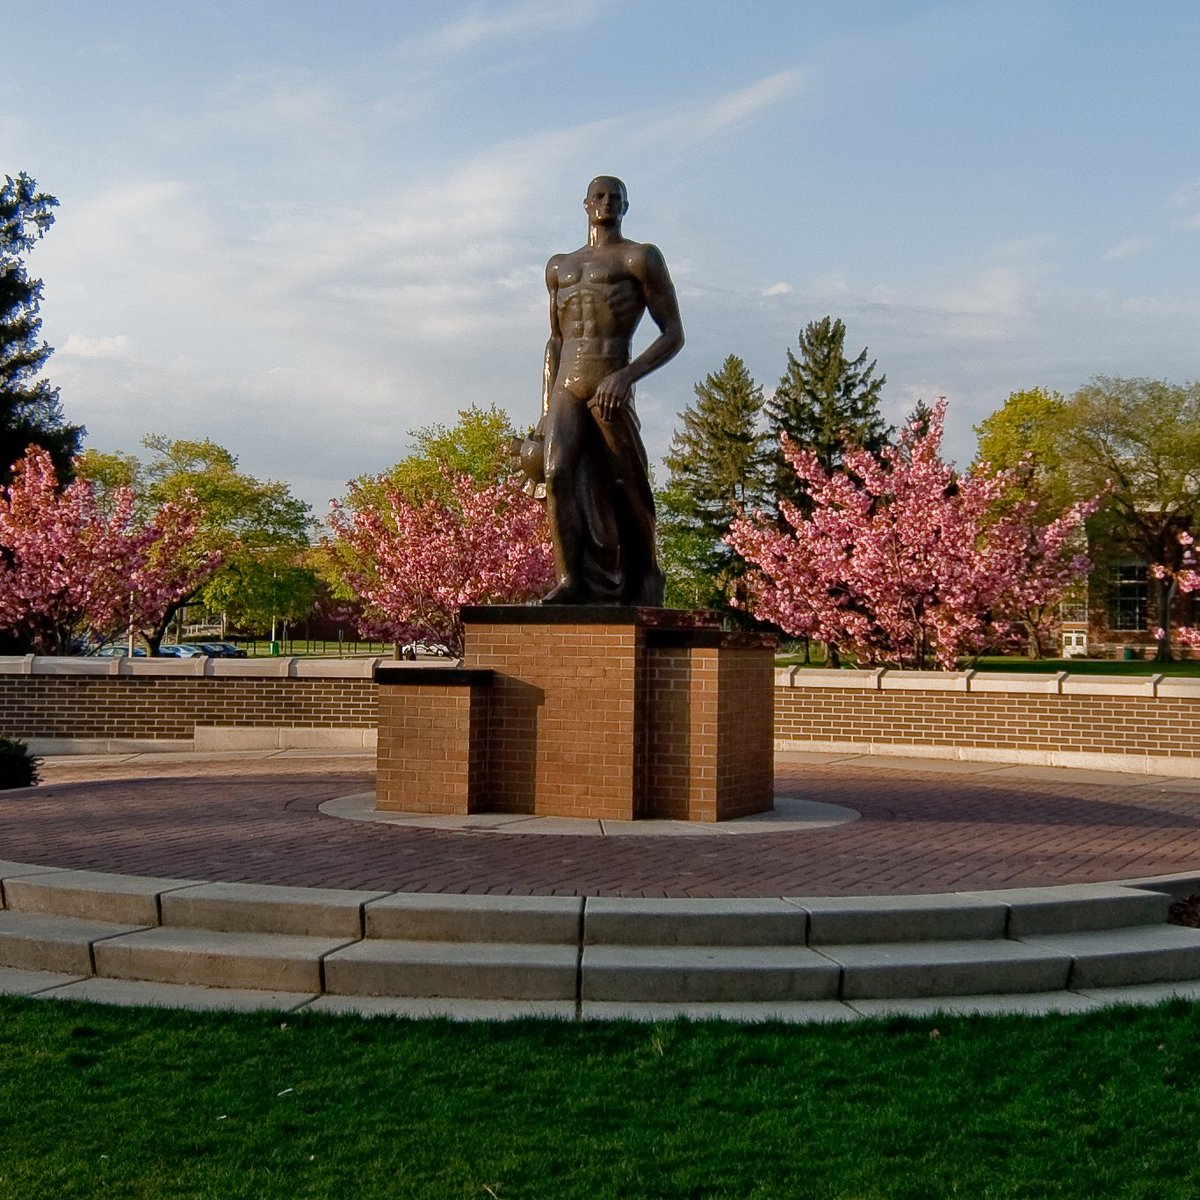 Msu Archives History Of The Spartan Statue T Co Rn0lquo9